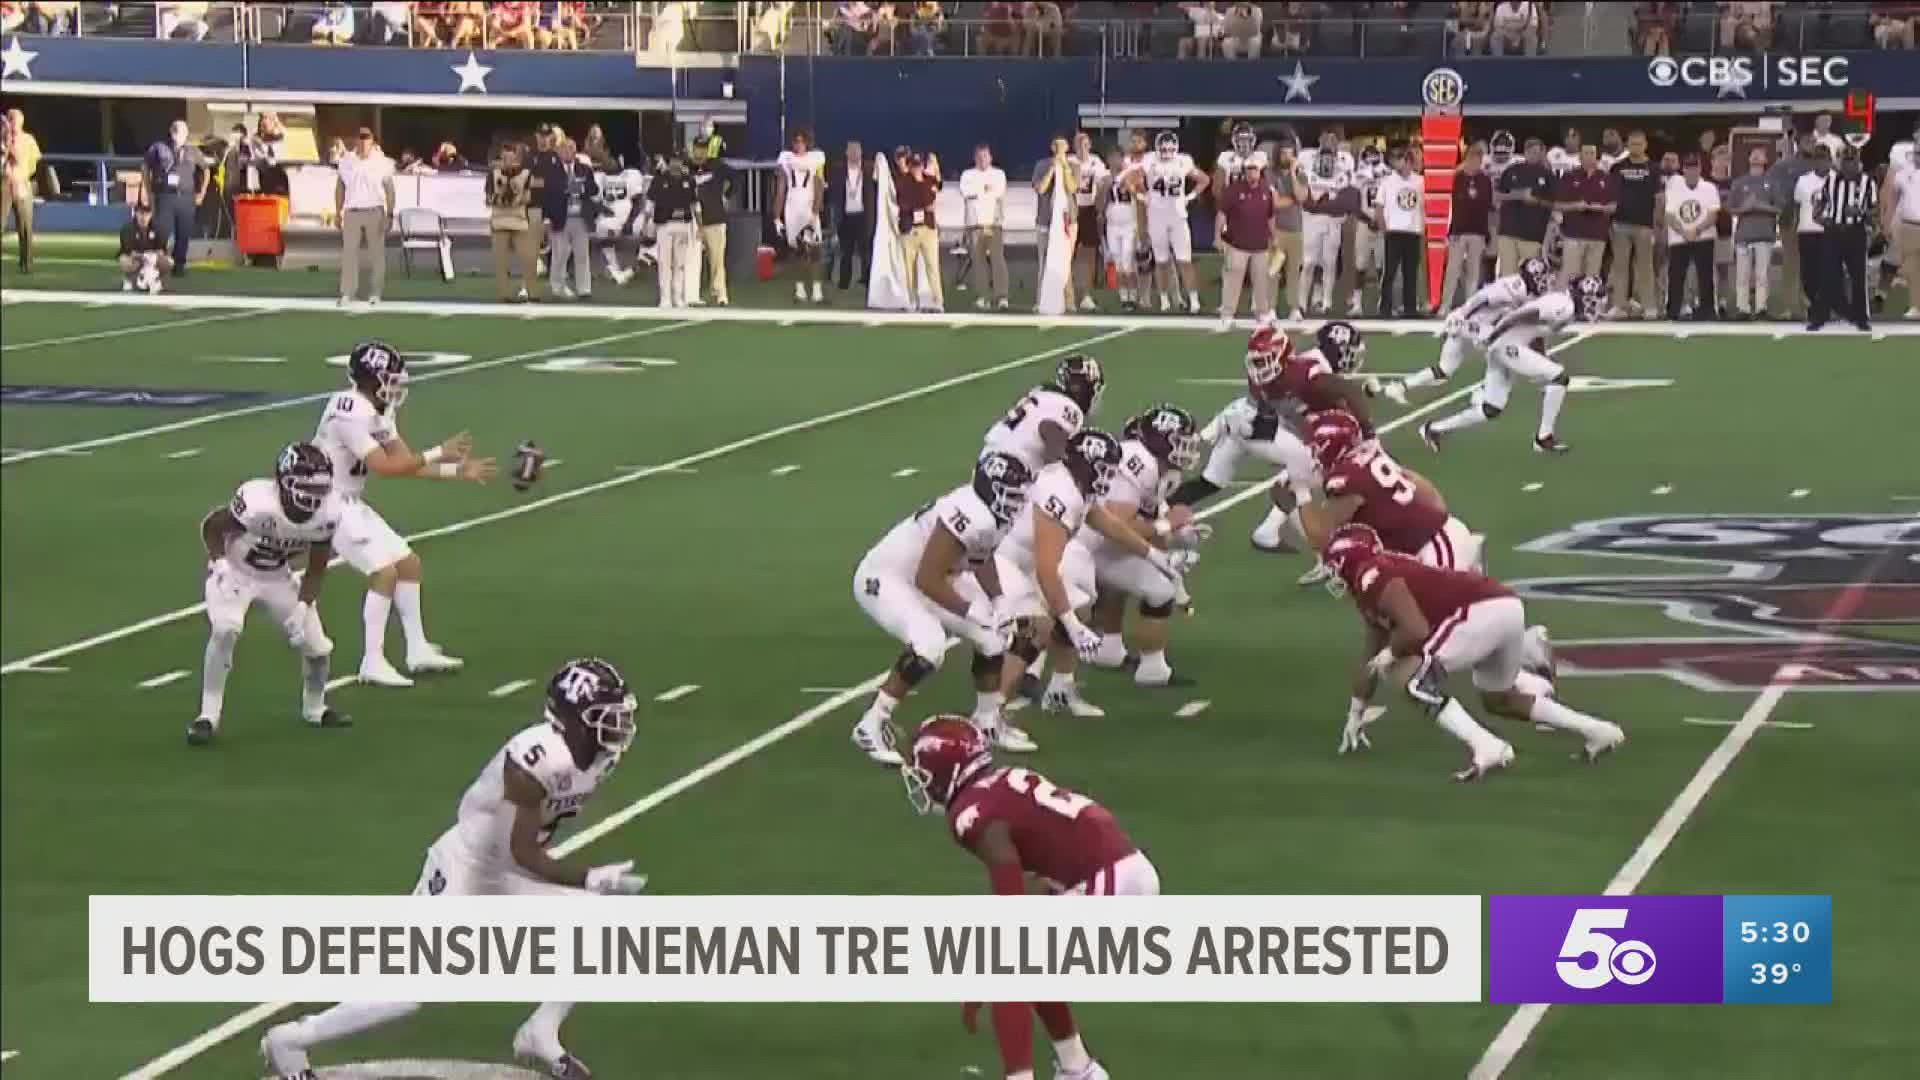 Hogs defensive lineman Tre Williams was arrested for driving while intoxicated.